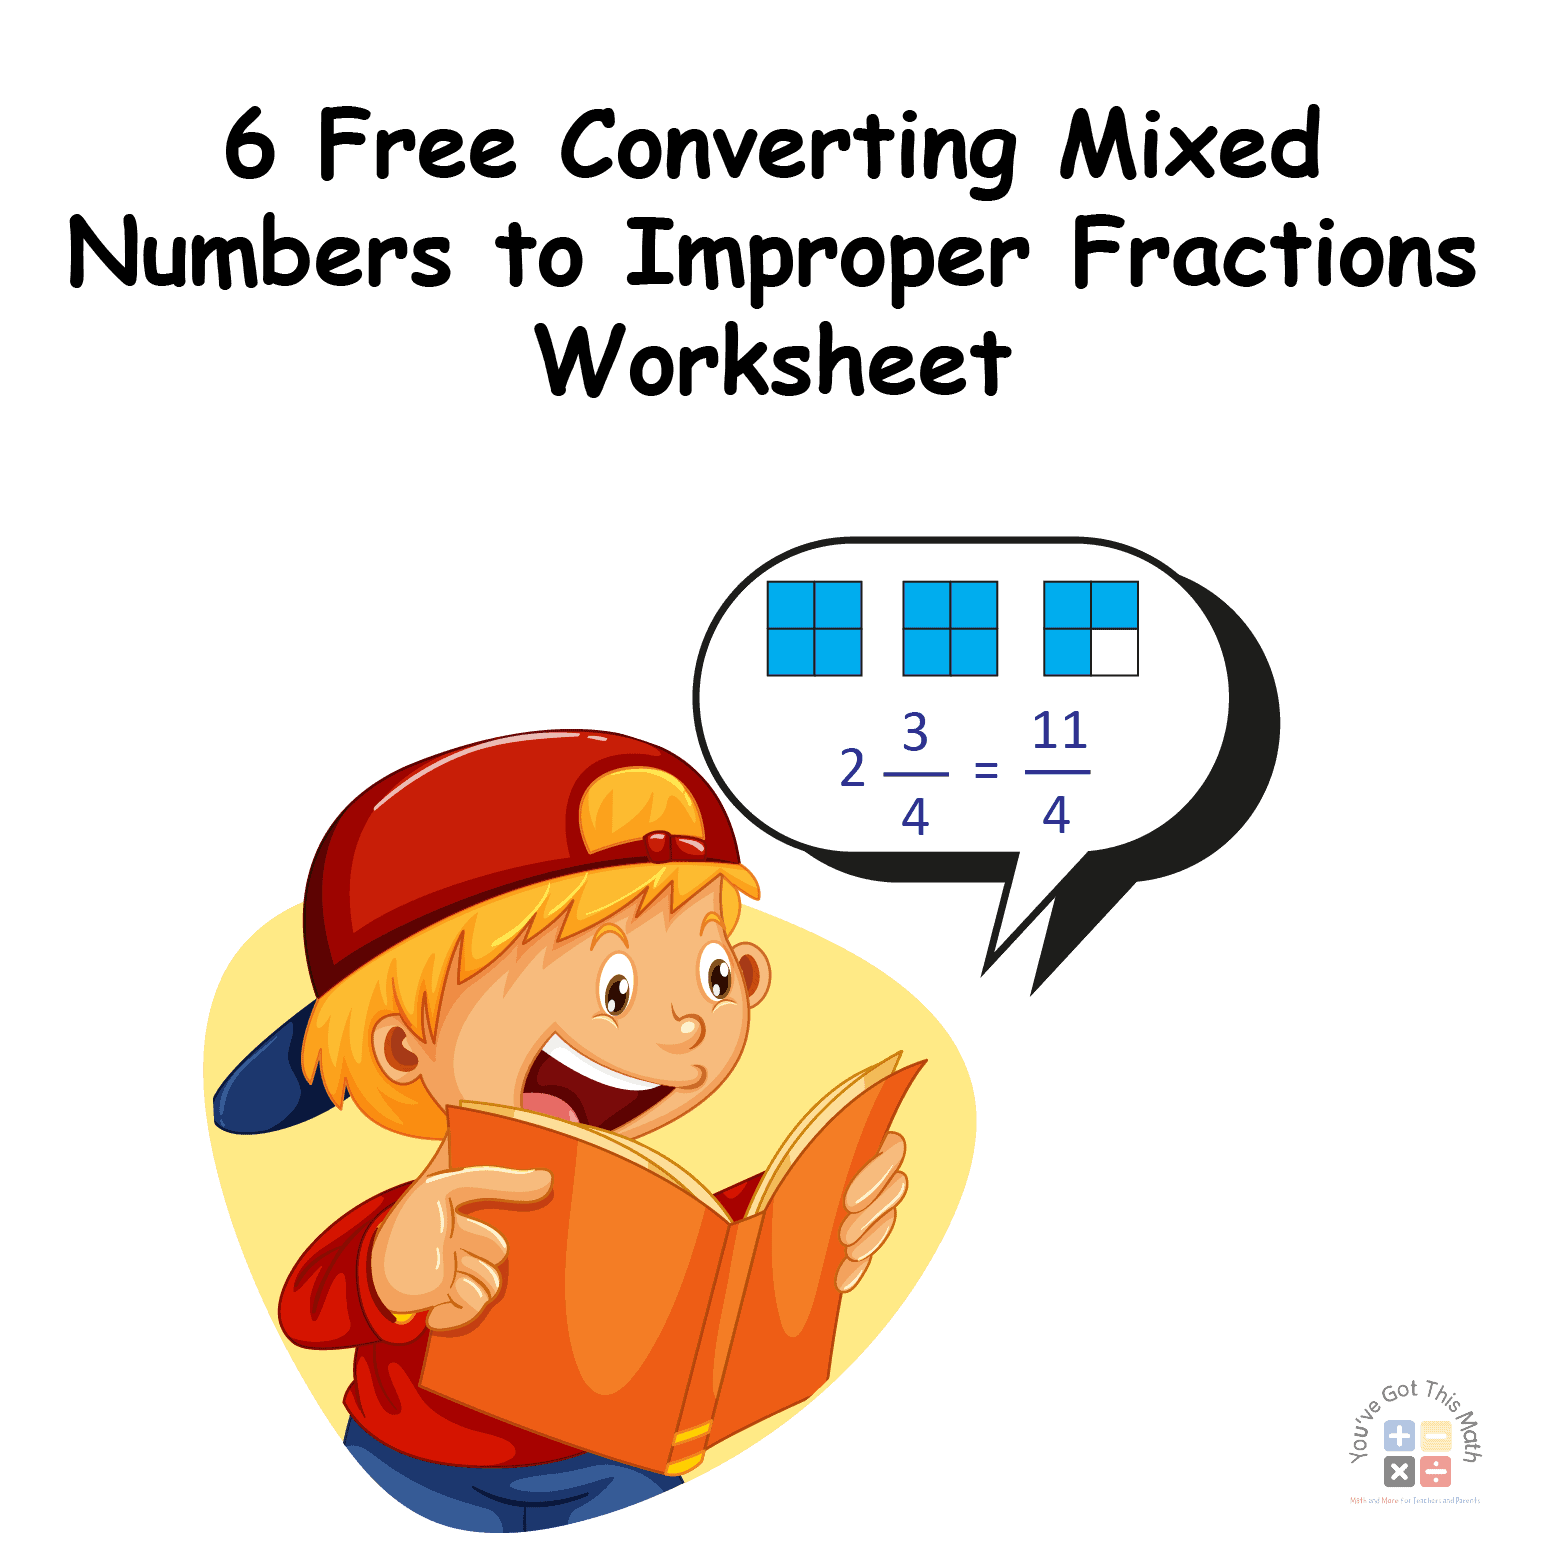 6 Free Converting Mixed Numbers to Improper Fractions Worksheet